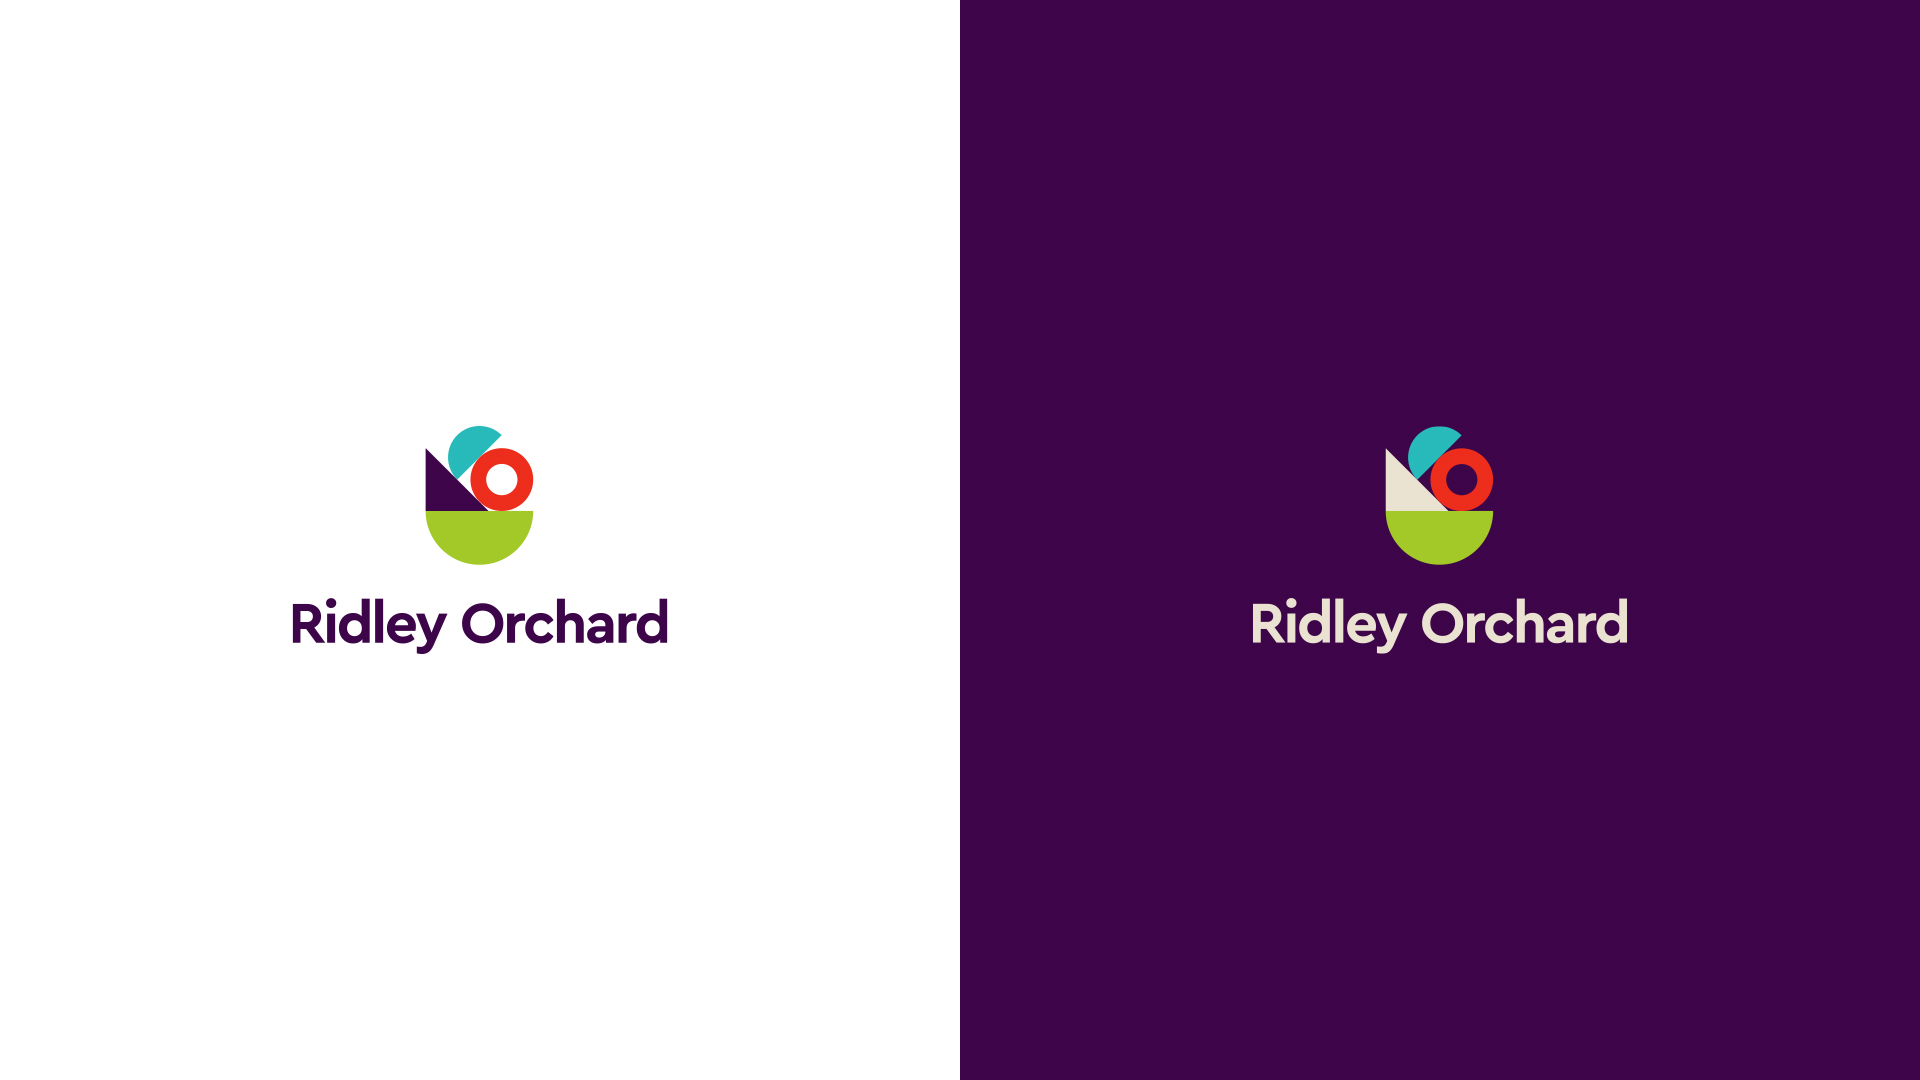 Ridley Orchard Child Care Center Brand Case Study